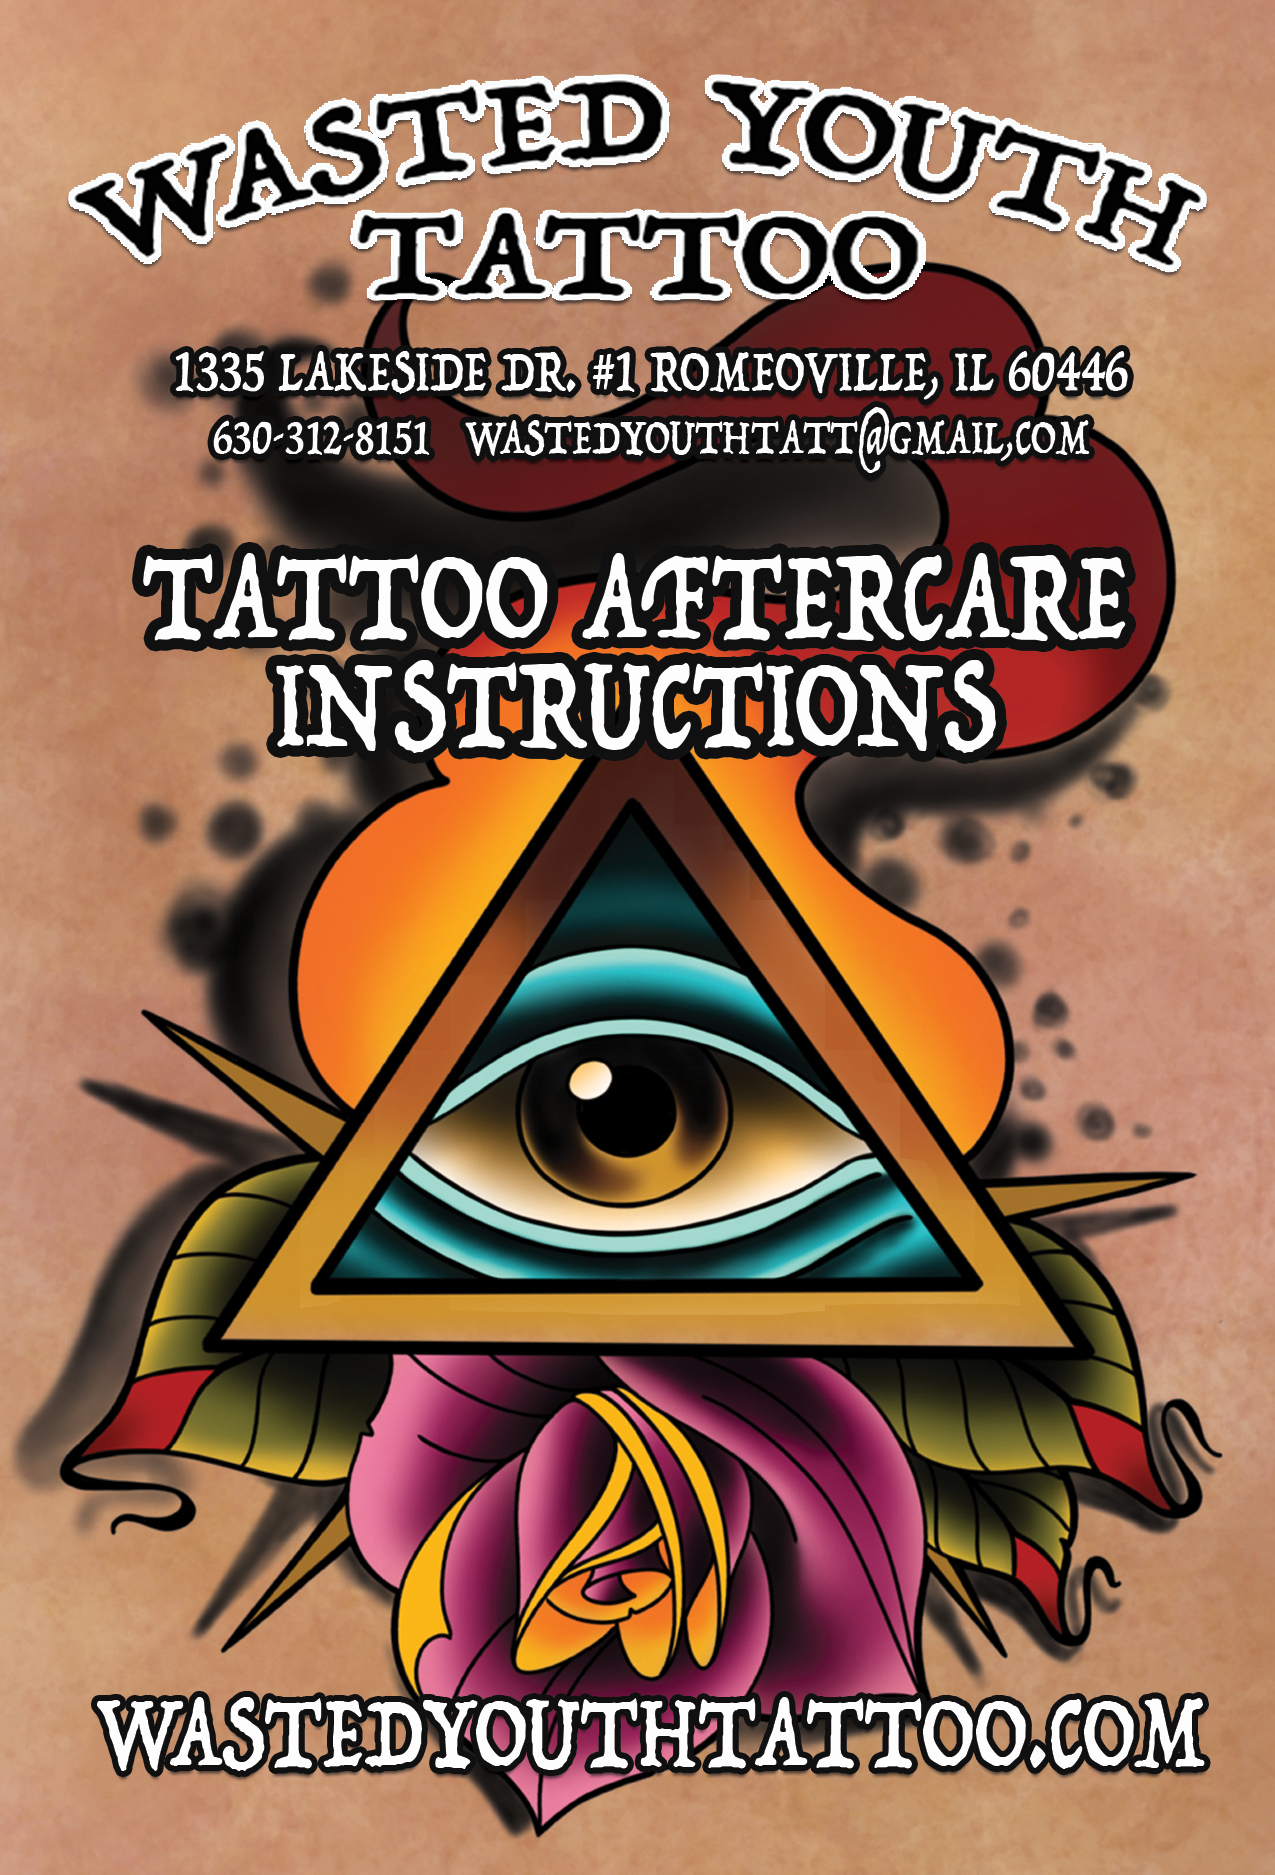 Pacific Soul Tattoo Flyer - Poster - Ad :: Behance